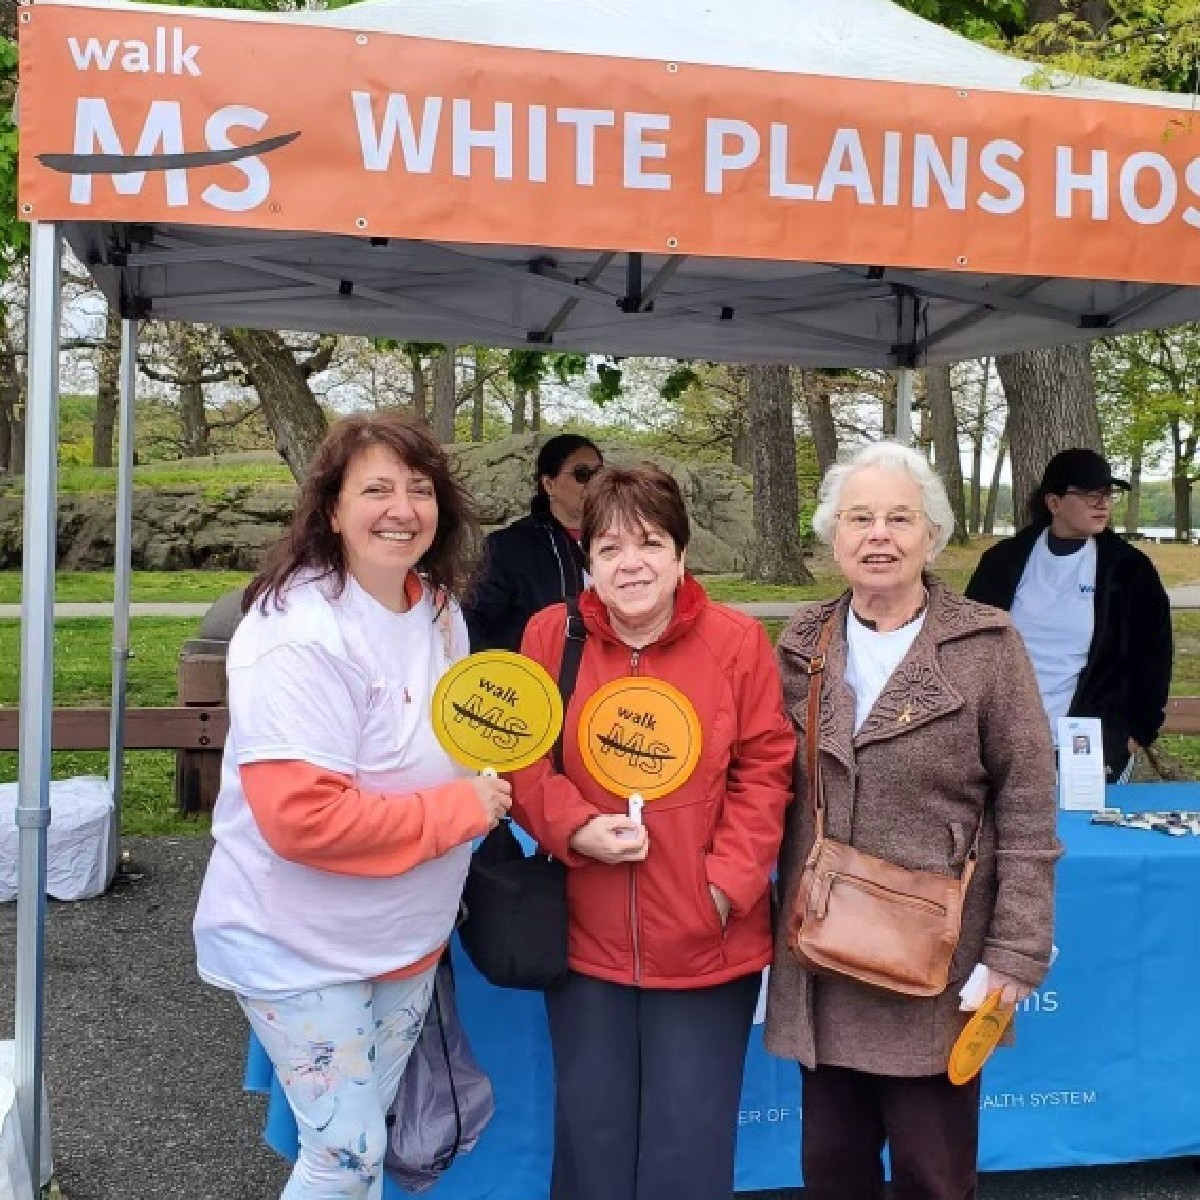 White Plains Hospital was well-represented at yesterday’s MS Walk by a team of clinicians, staff and supporters, who raised more than $2,000 for the National @mssociety! #WalkMS